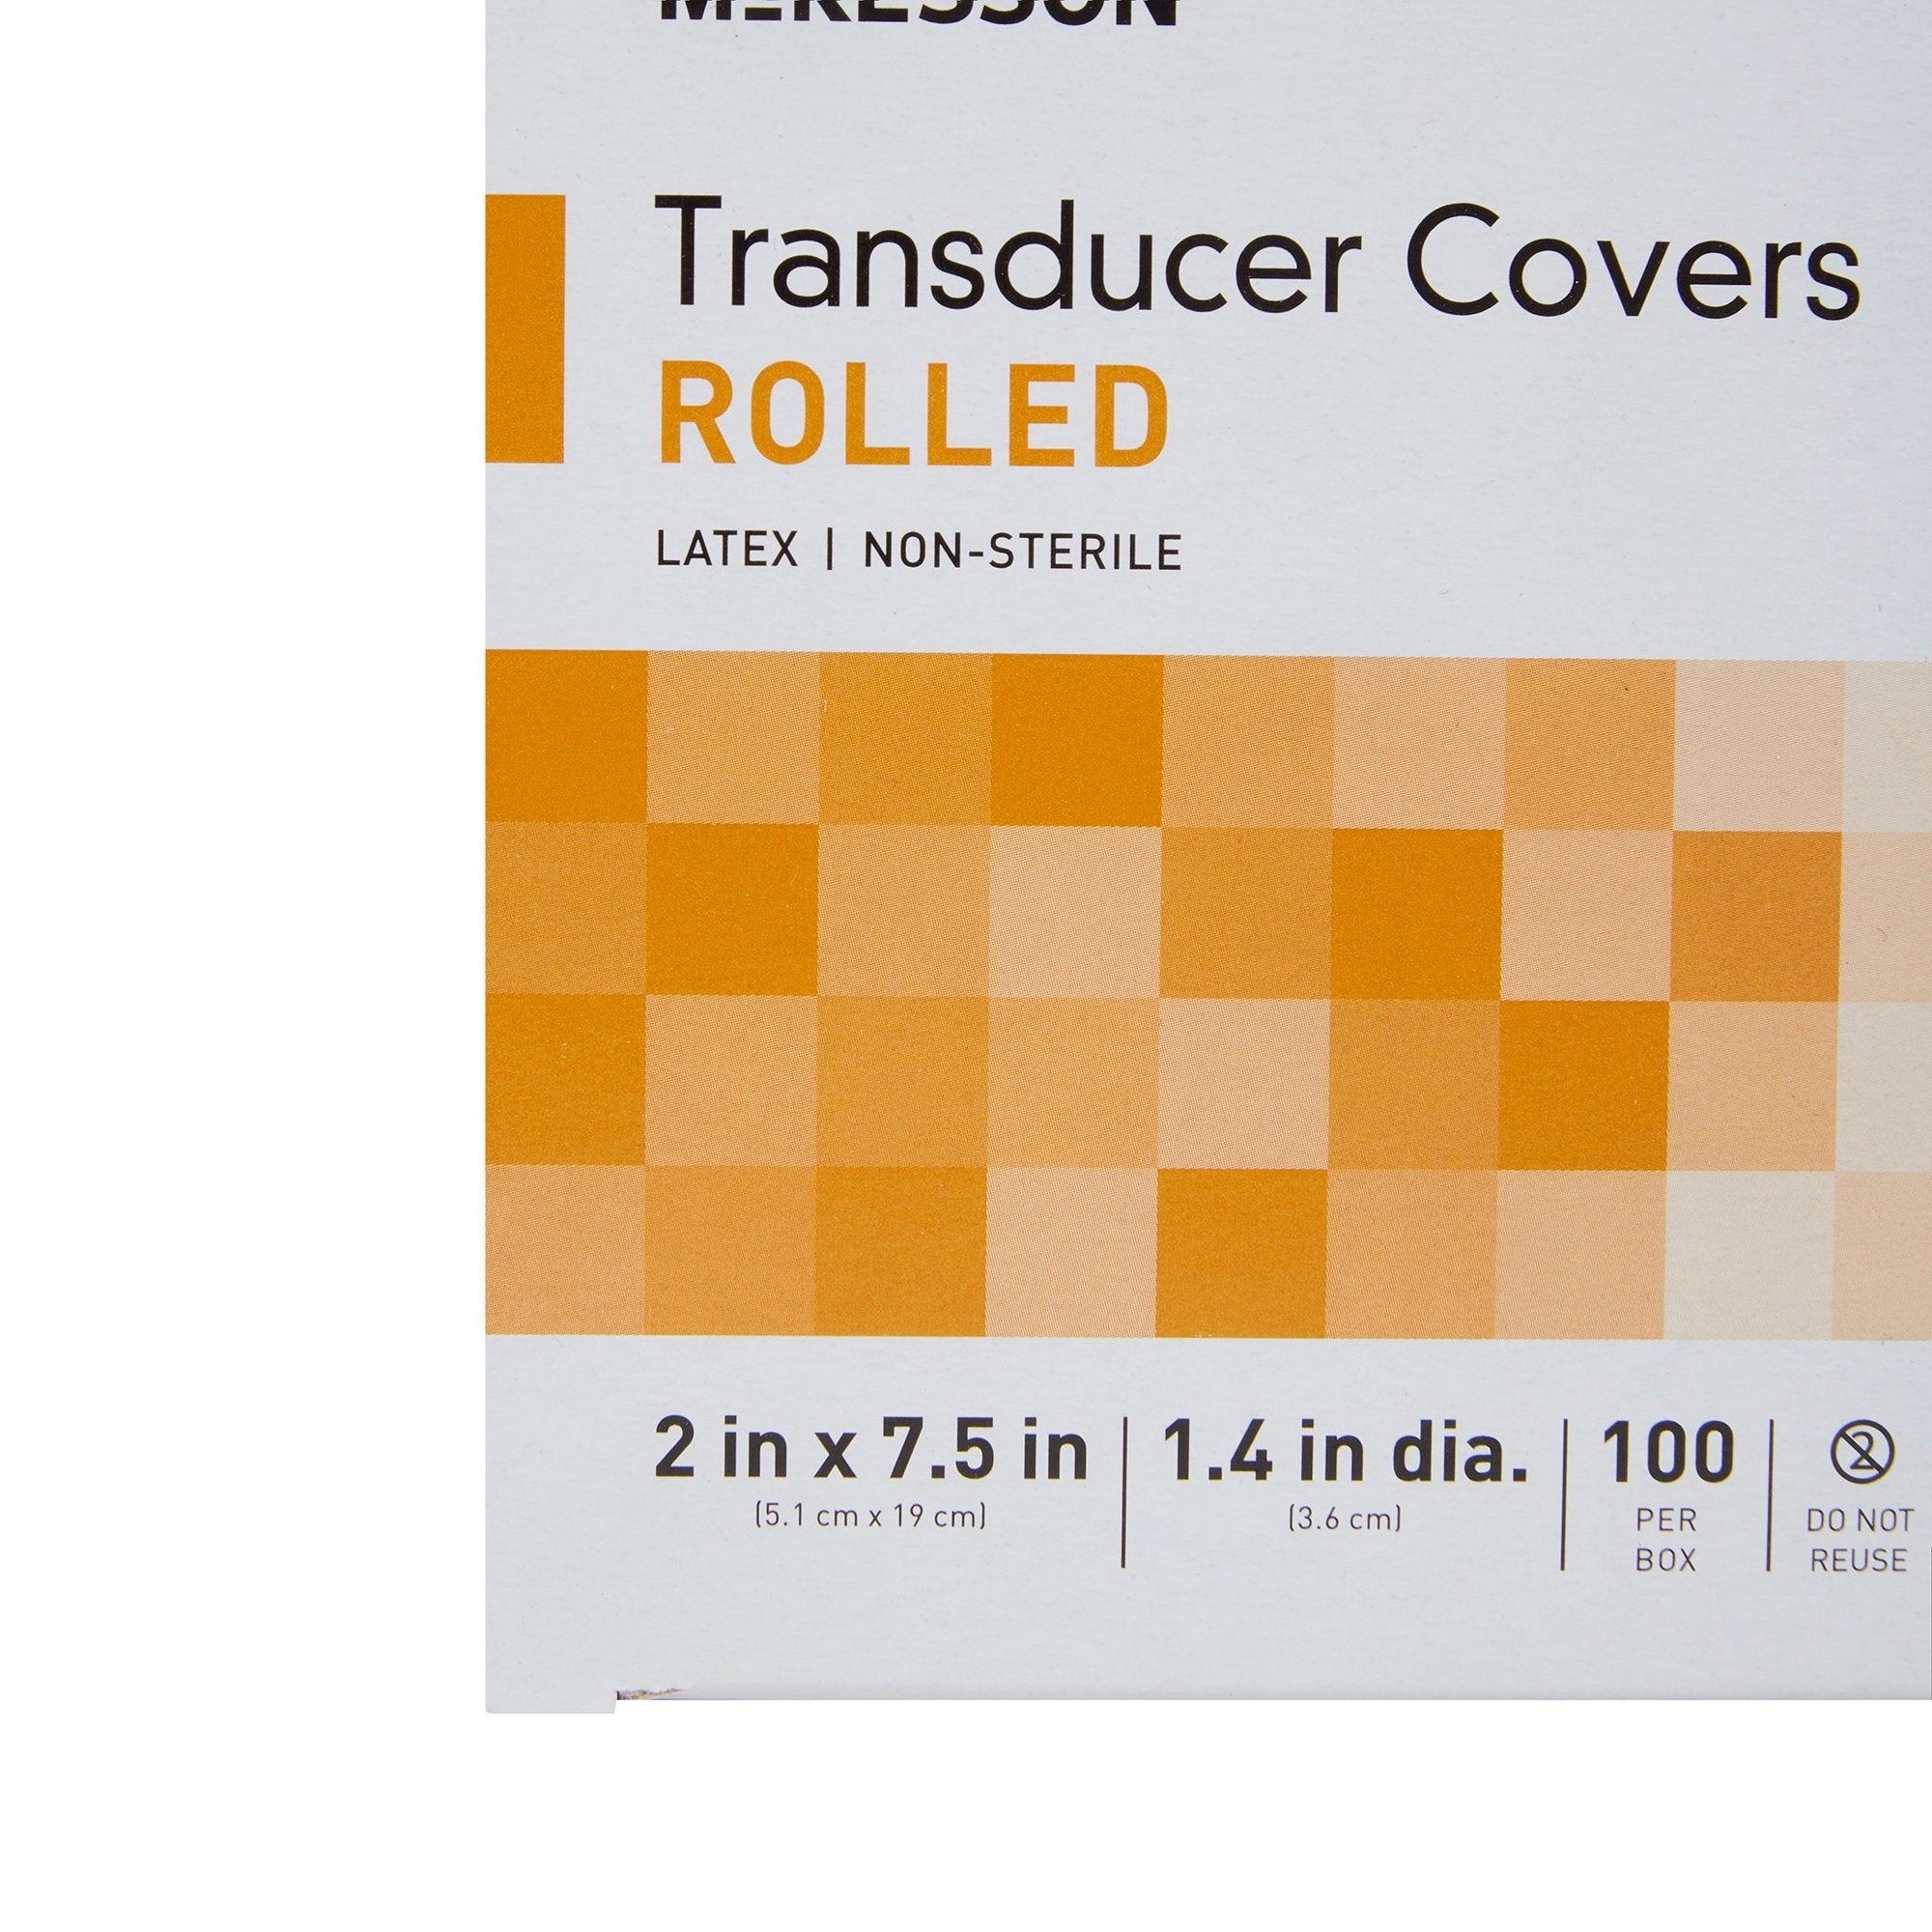 Ultrasound Transducer Cover McKesson 2 X 7-1/2 Inch Latex NonSterile For use with Ultrasound External Probe